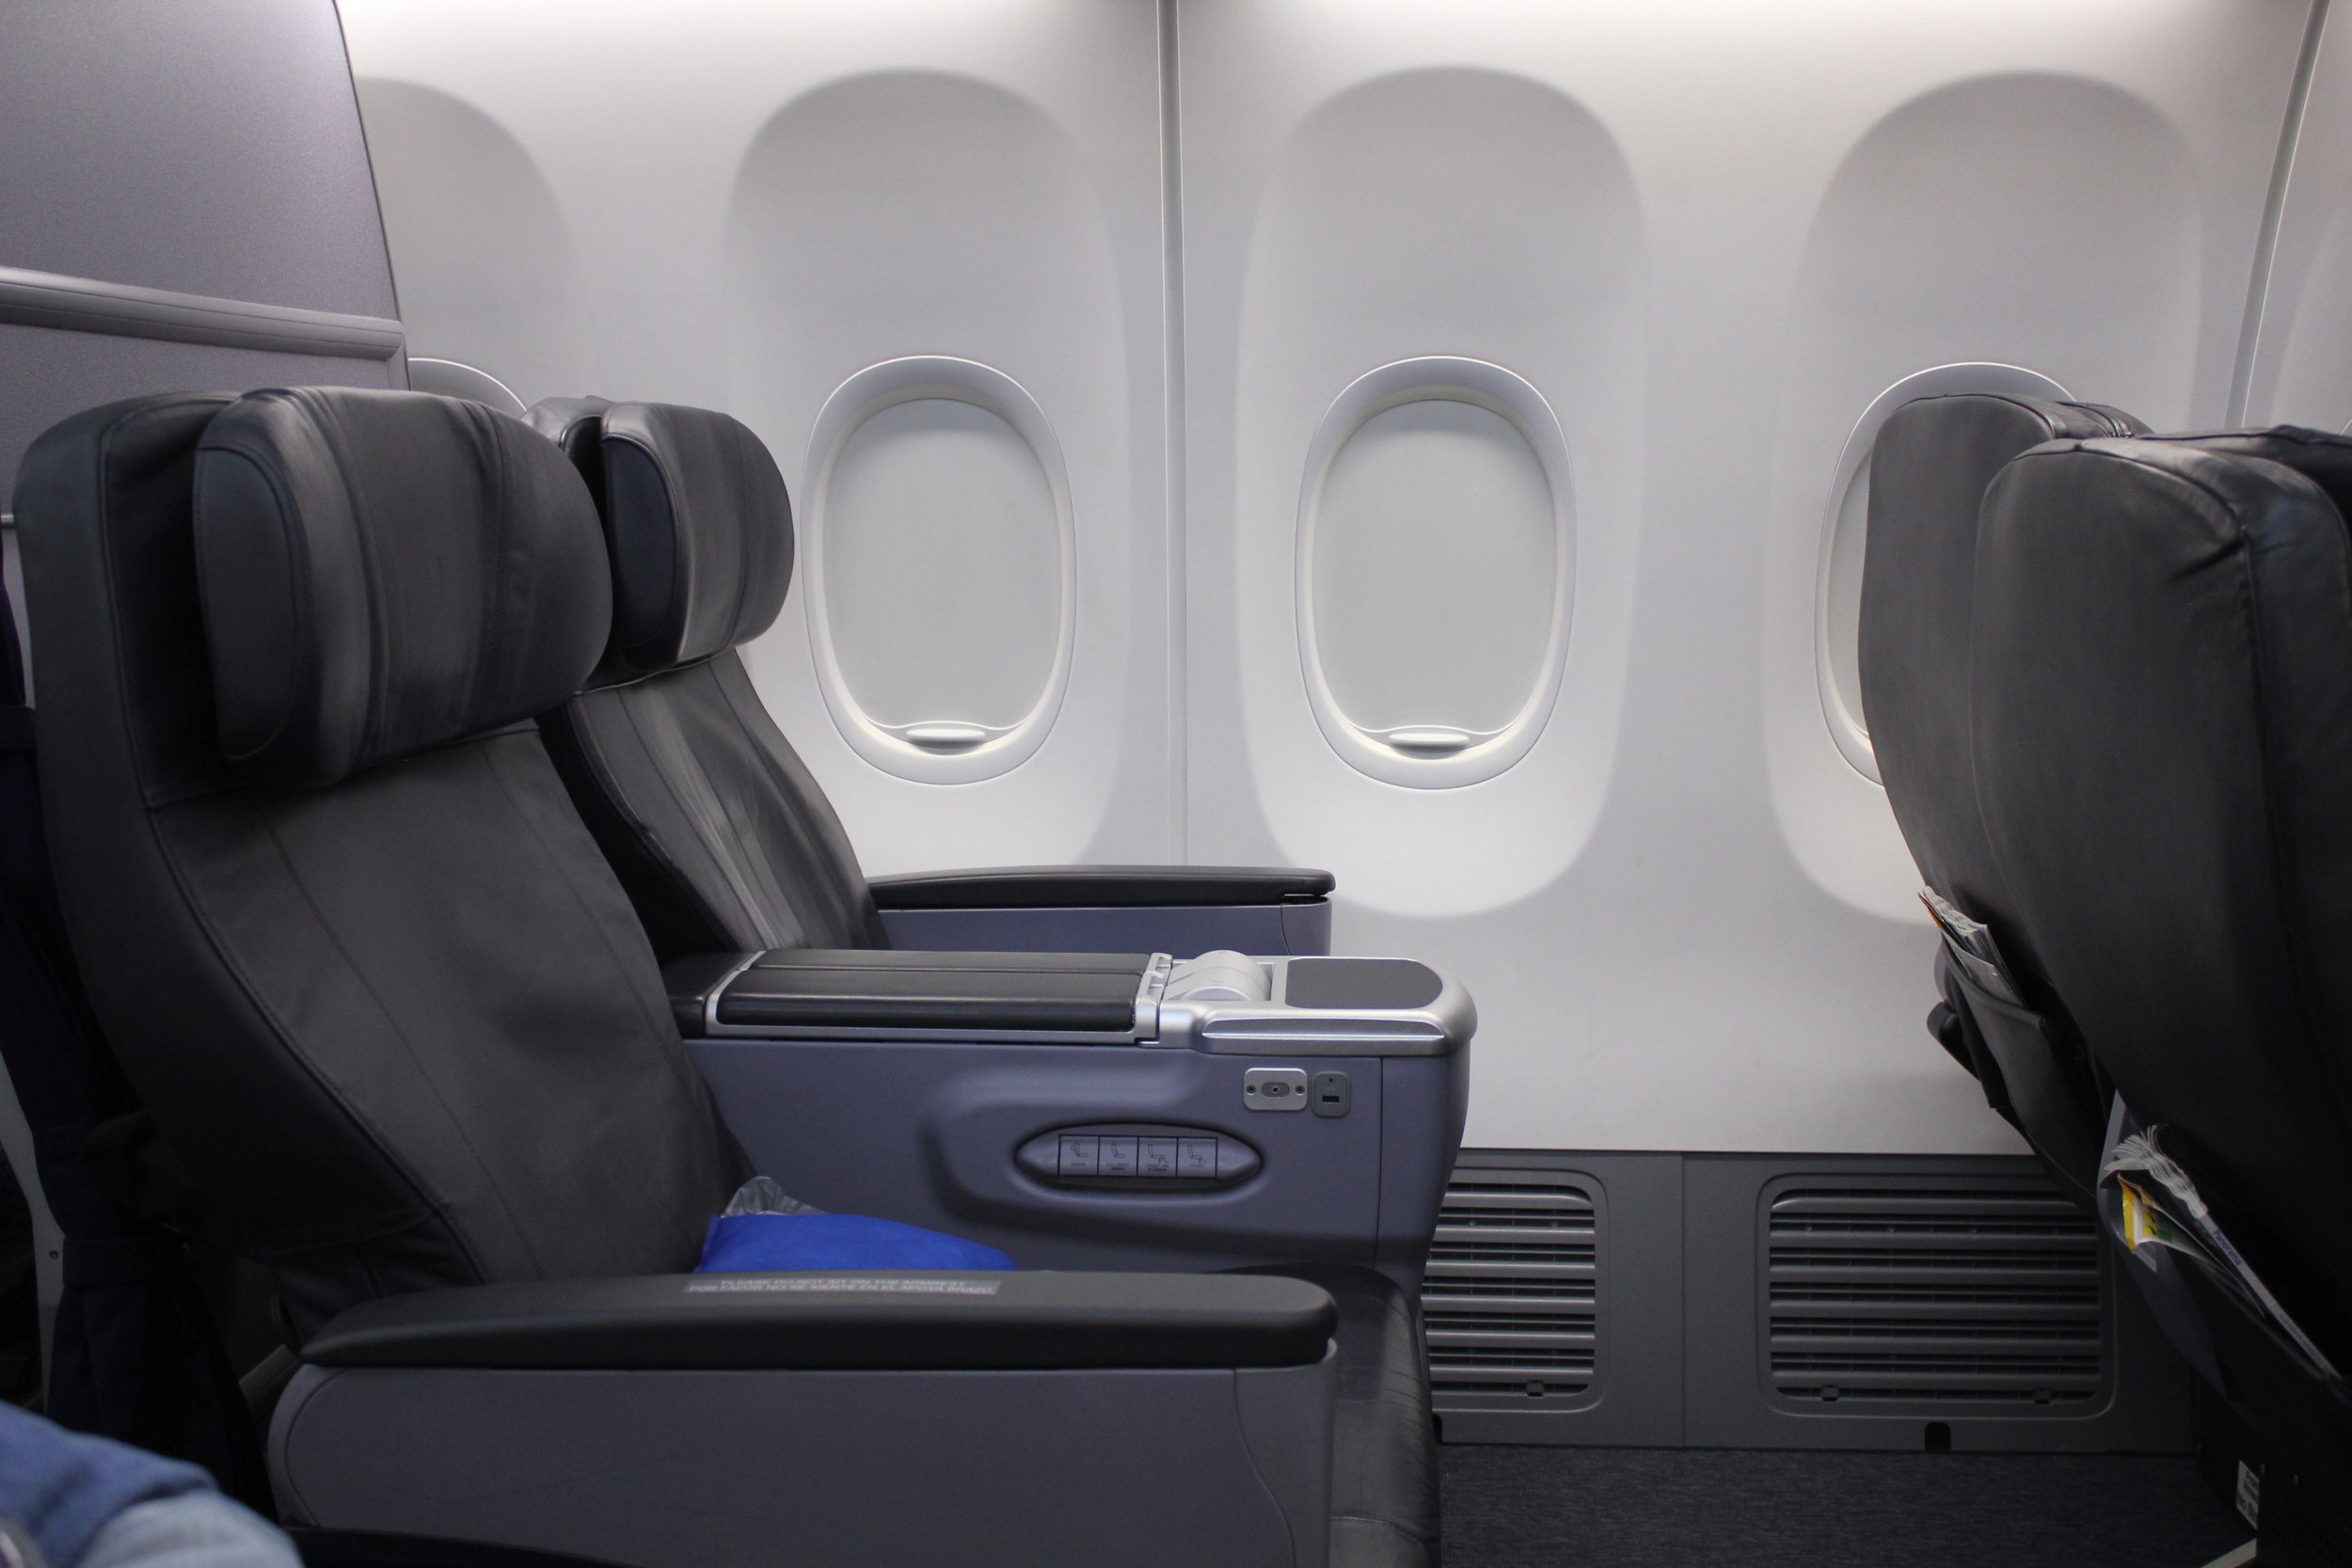 Copa Airlines 737 business class